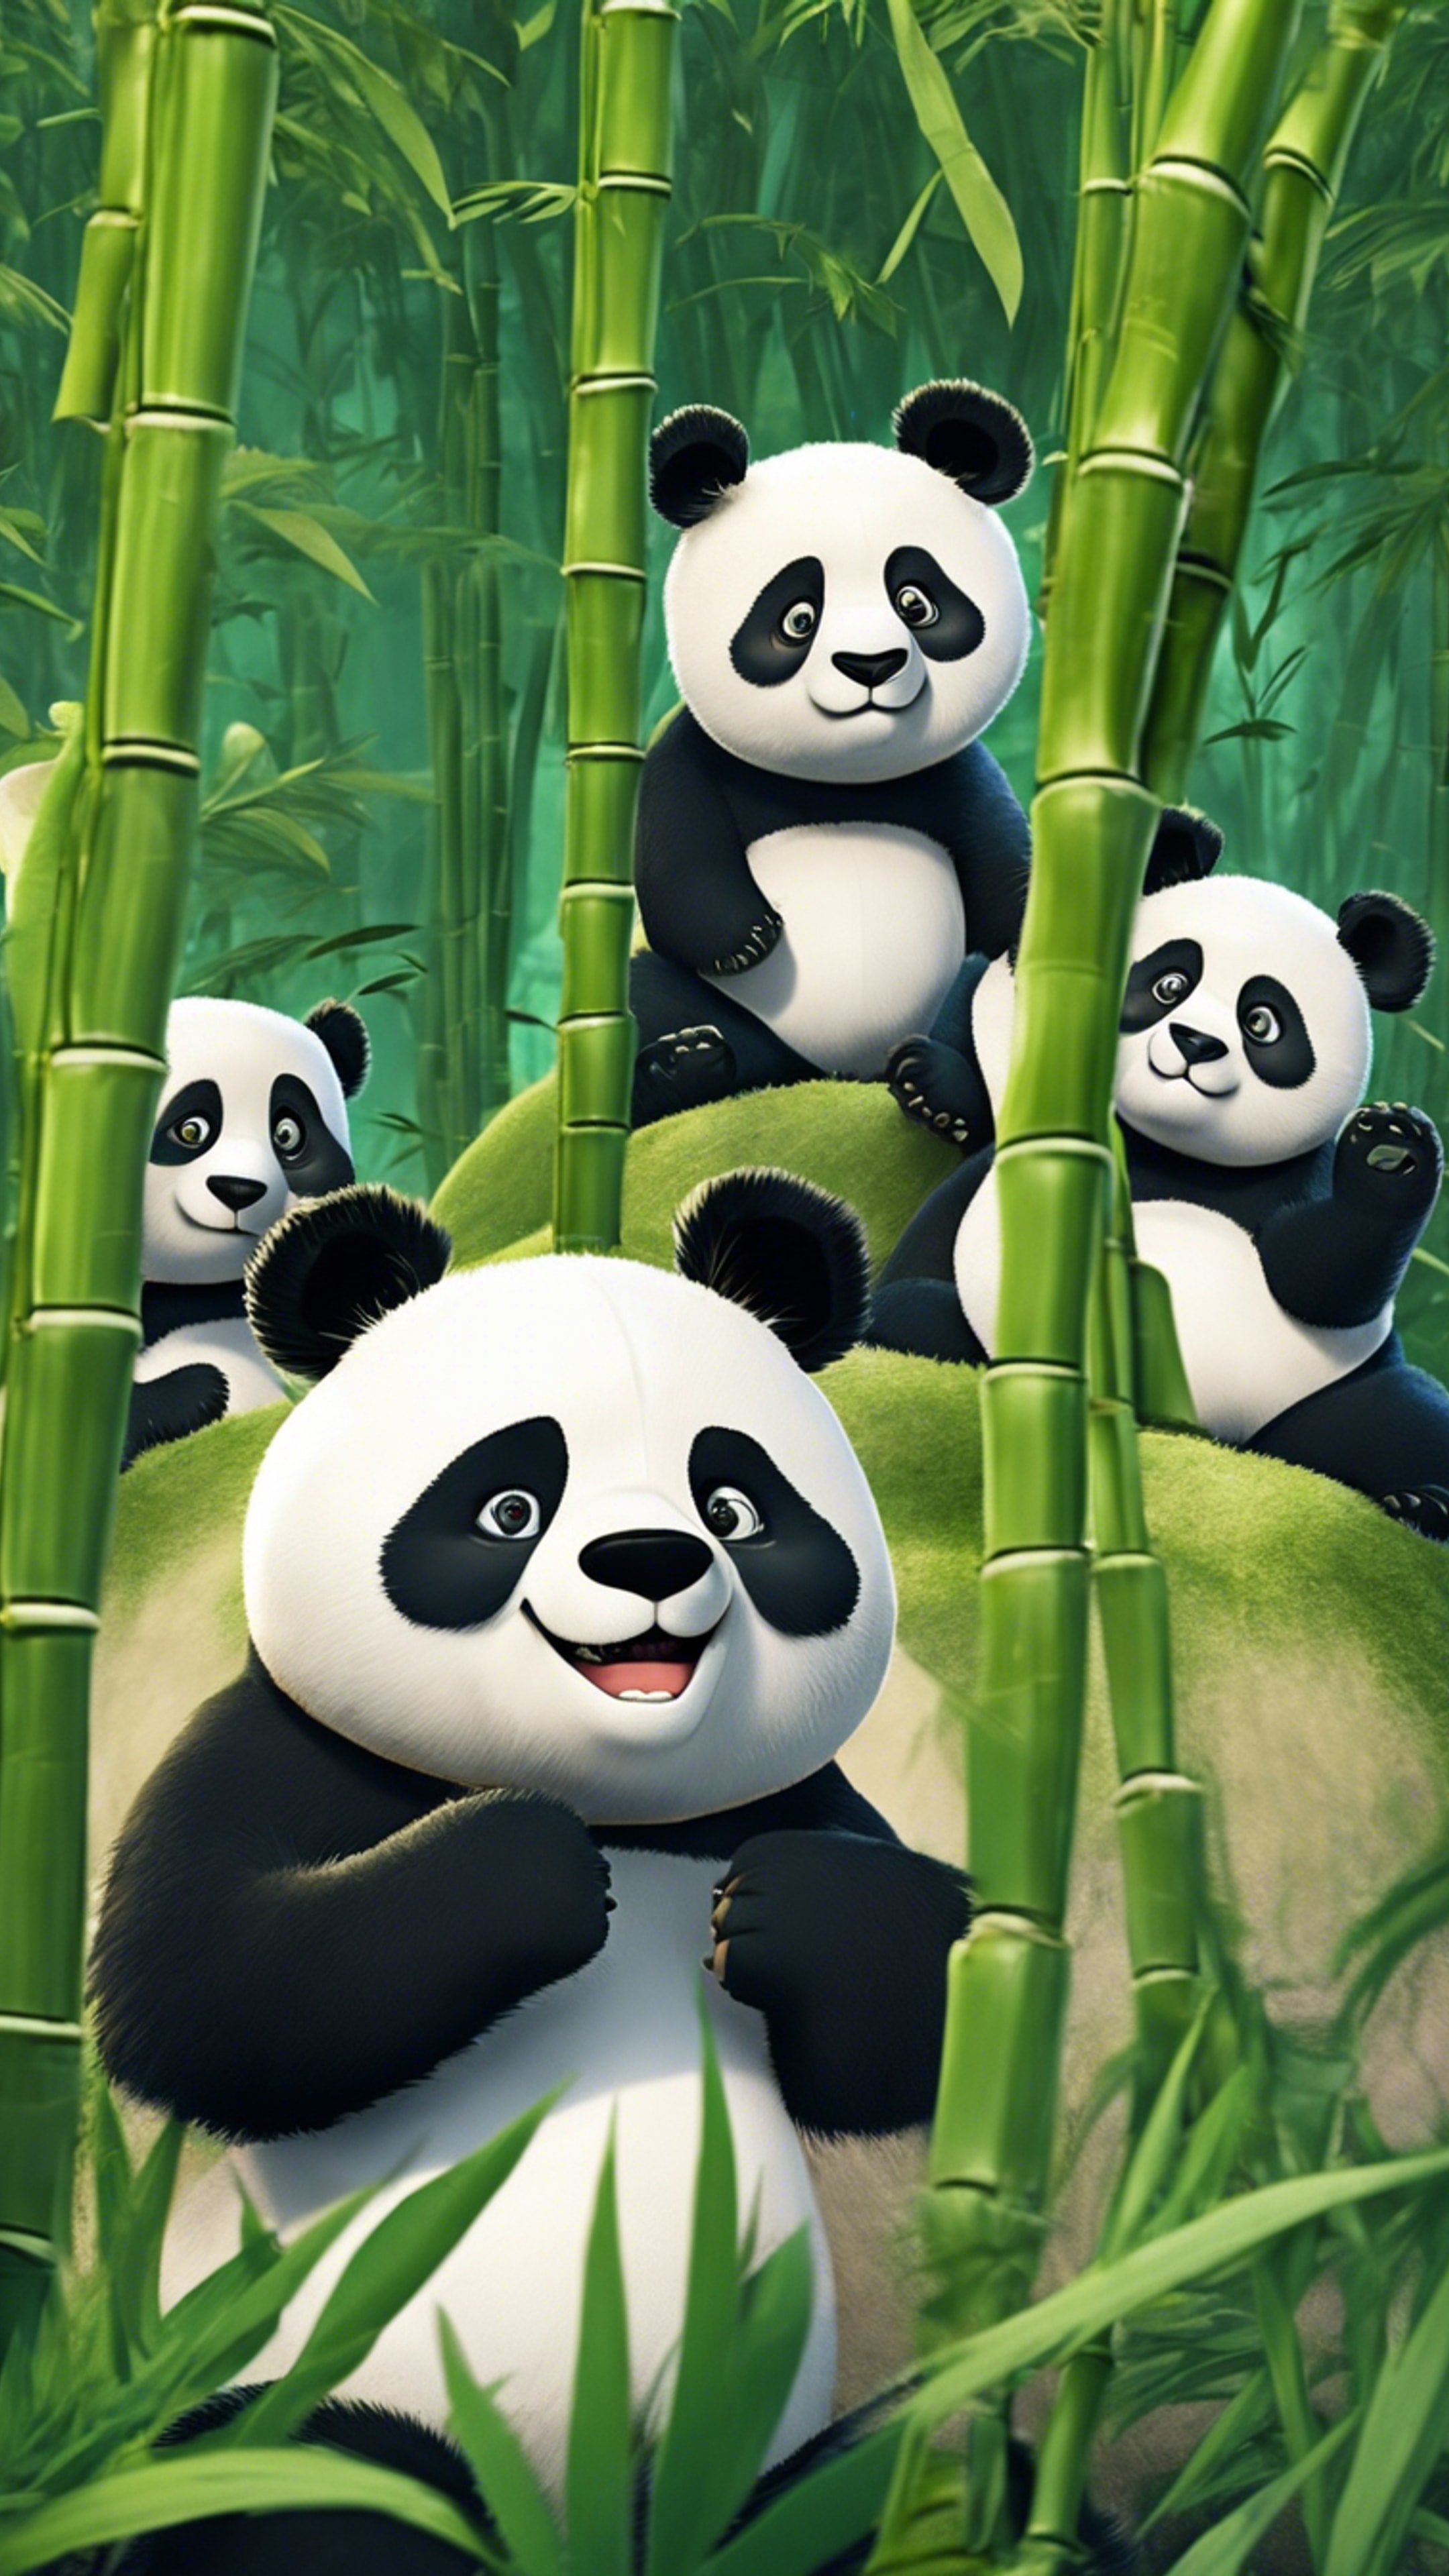 A group of fluffy cartoon pandas playing hide and seek in green bamboo forest. Tapeta[63bcd8976f104e0d843a]